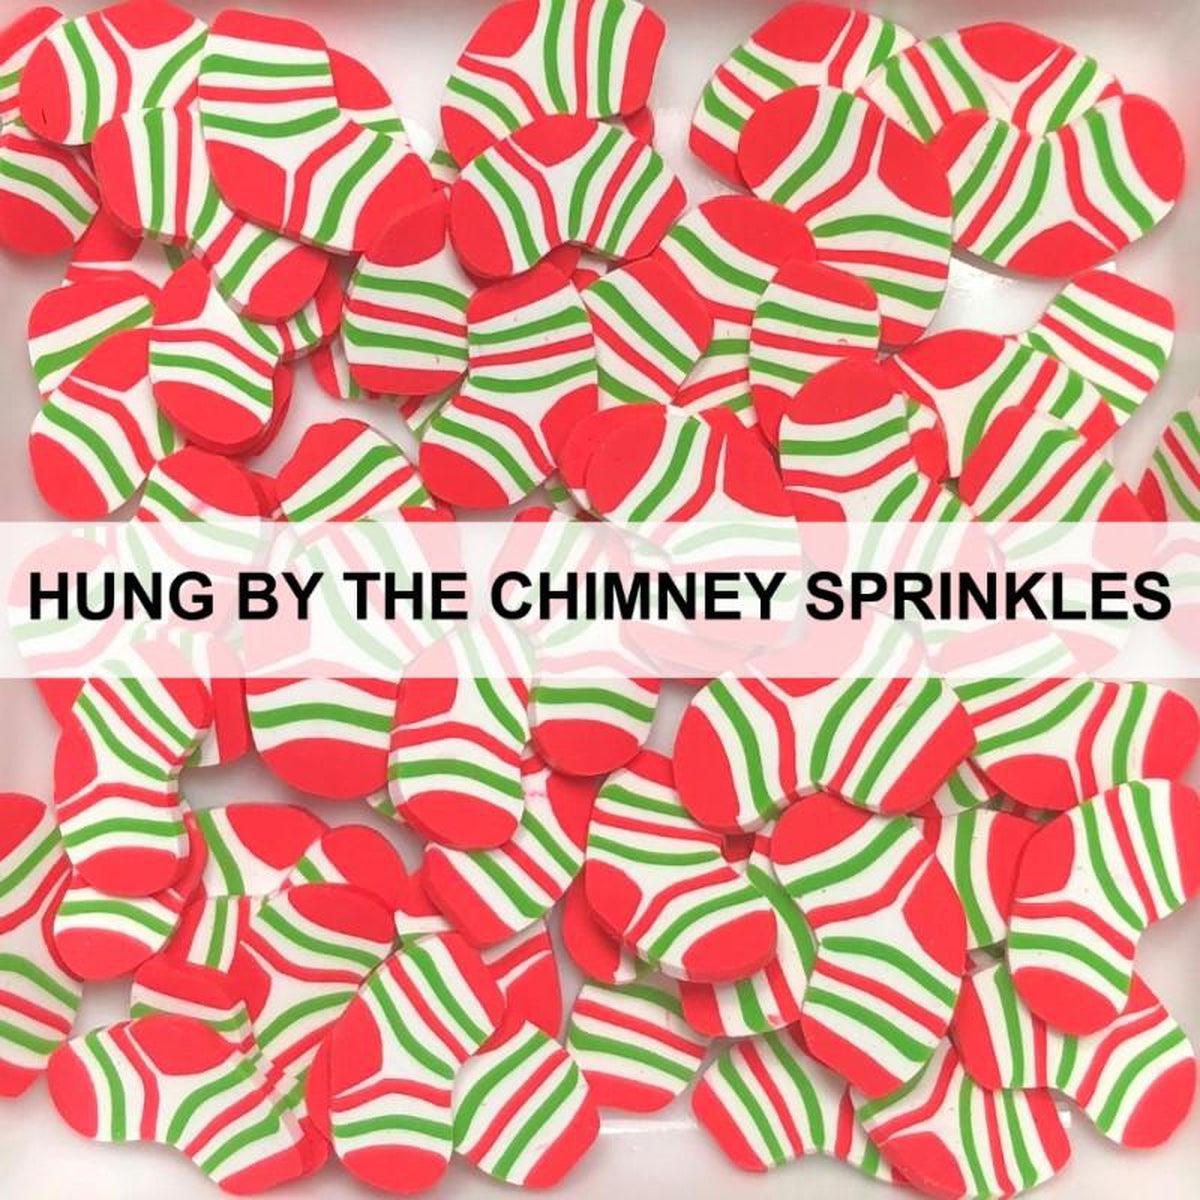 Hung by the Chimney Sprinkles